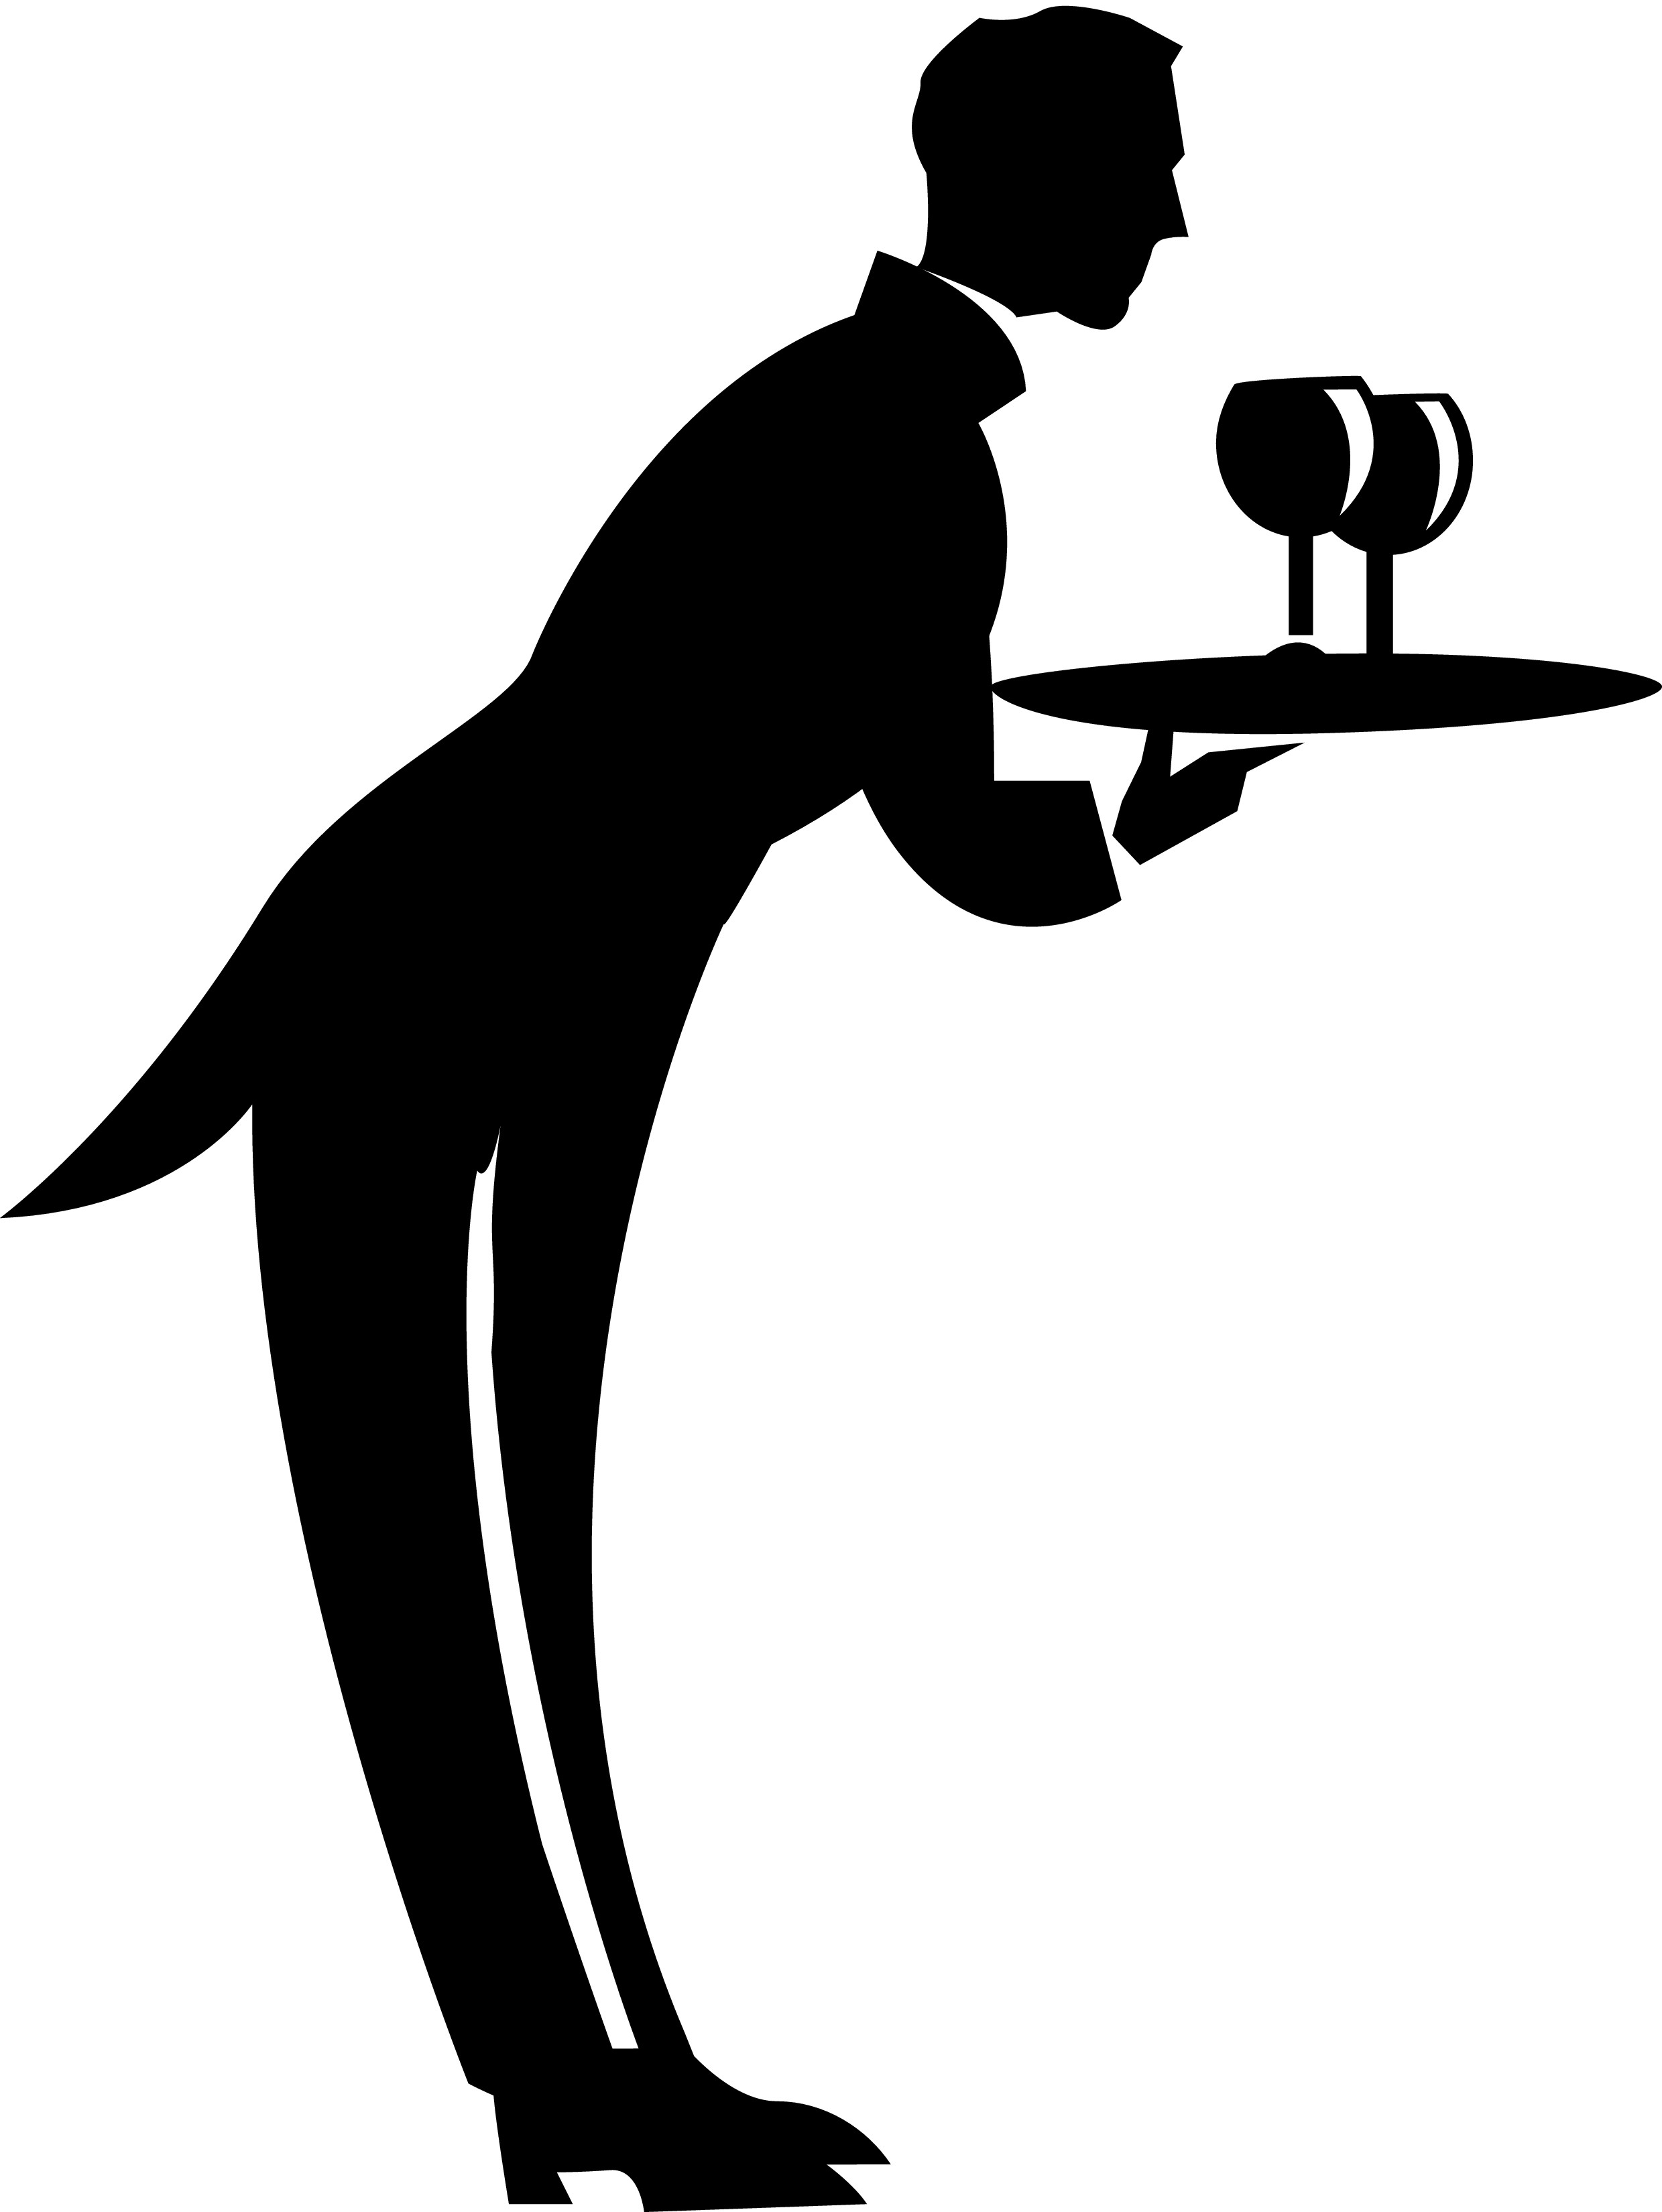 10 Waiter Clip Art Free Cliparts That You Can Download To You Computer